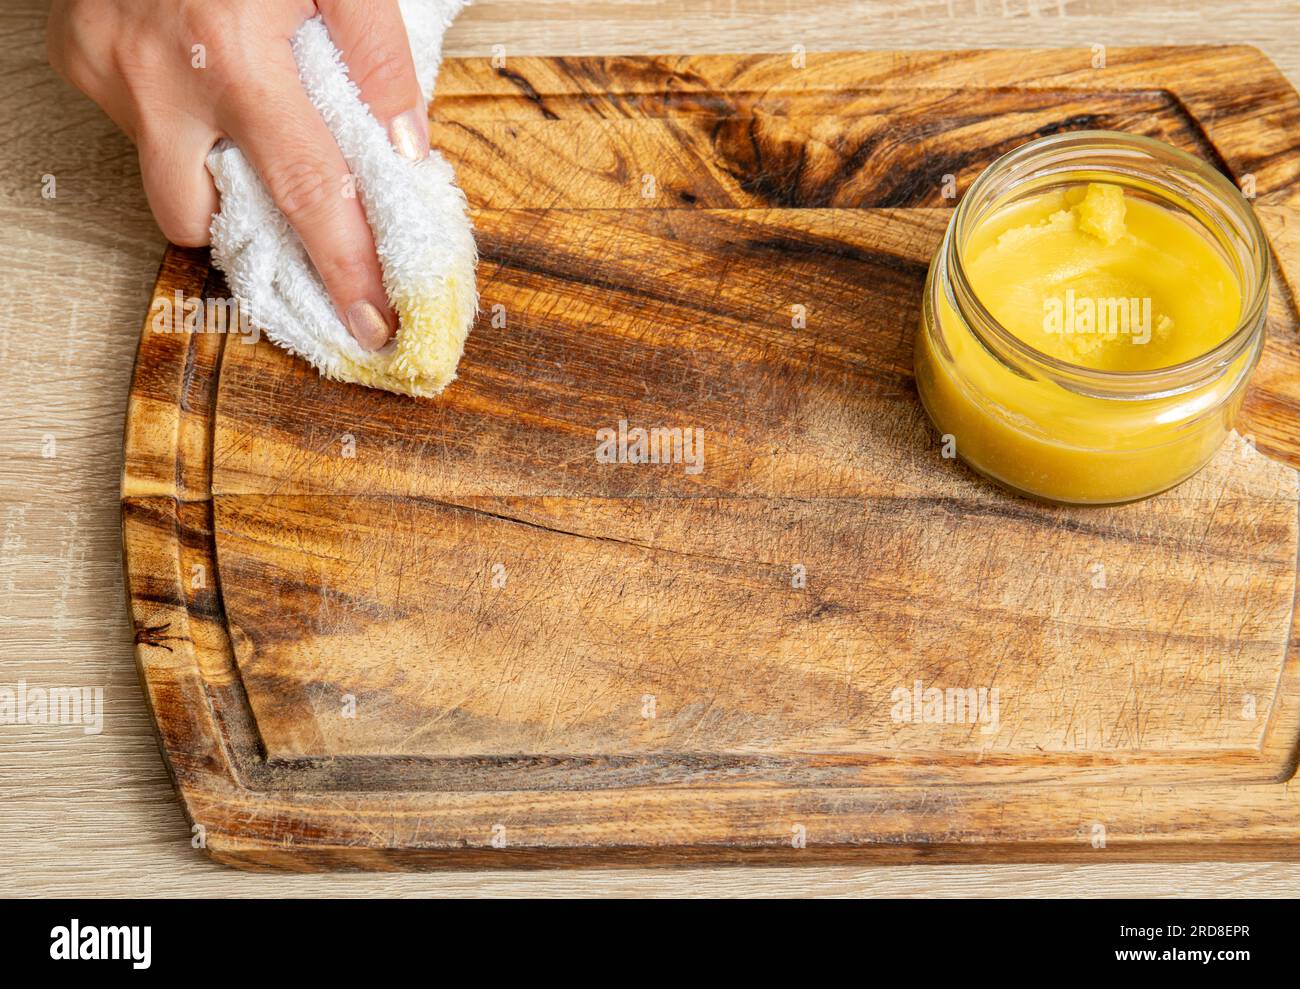 Woman hands apply homemade beeswax wood treatment polish to restore natural wood cutting board. Beeswax, olive oil and essential oil, soft cloth. Stock Photo